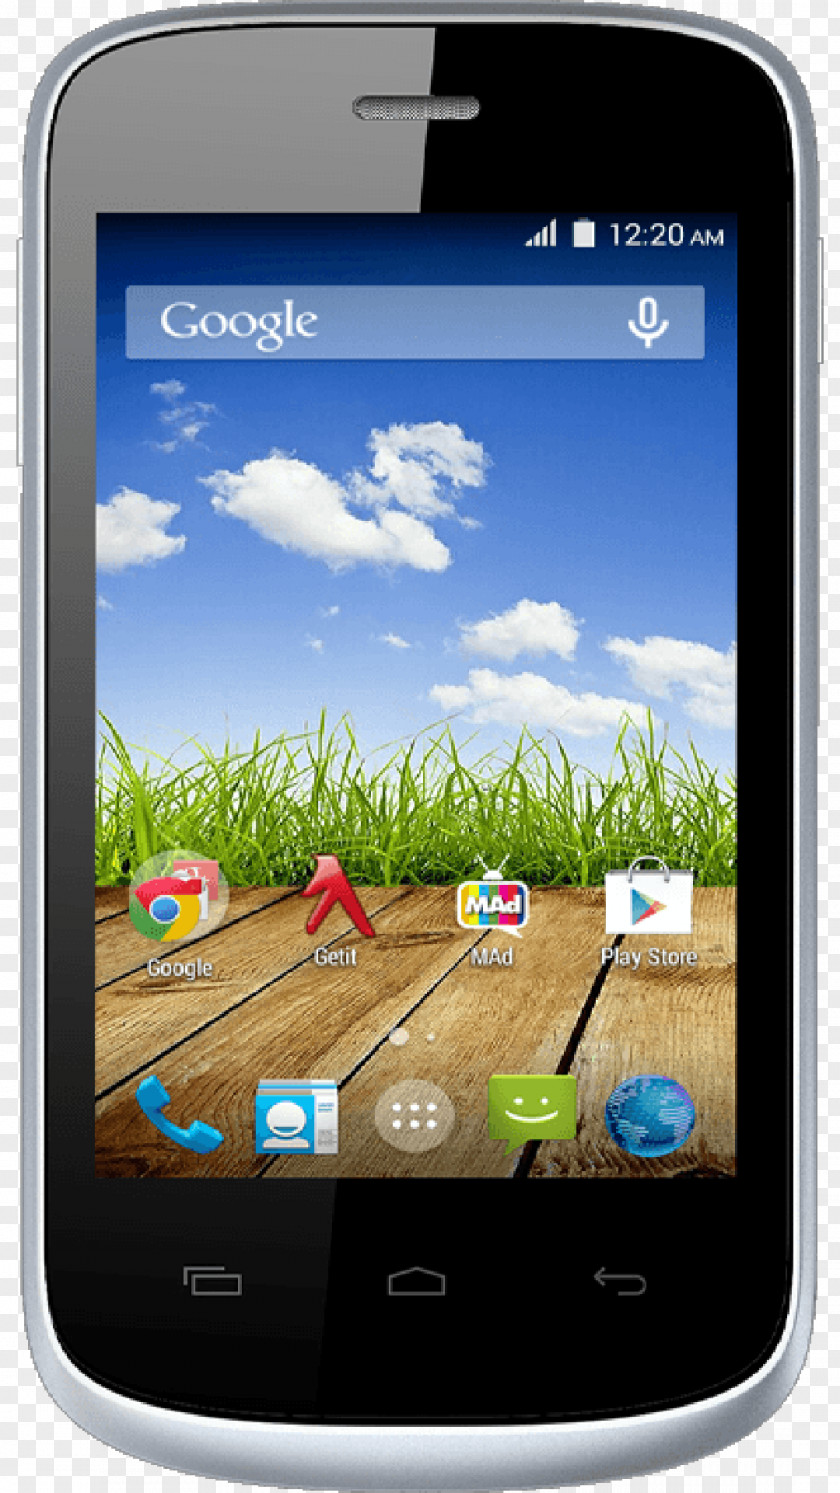 Bolt Micromax Informatics Android Smartphone India Telephone PNG